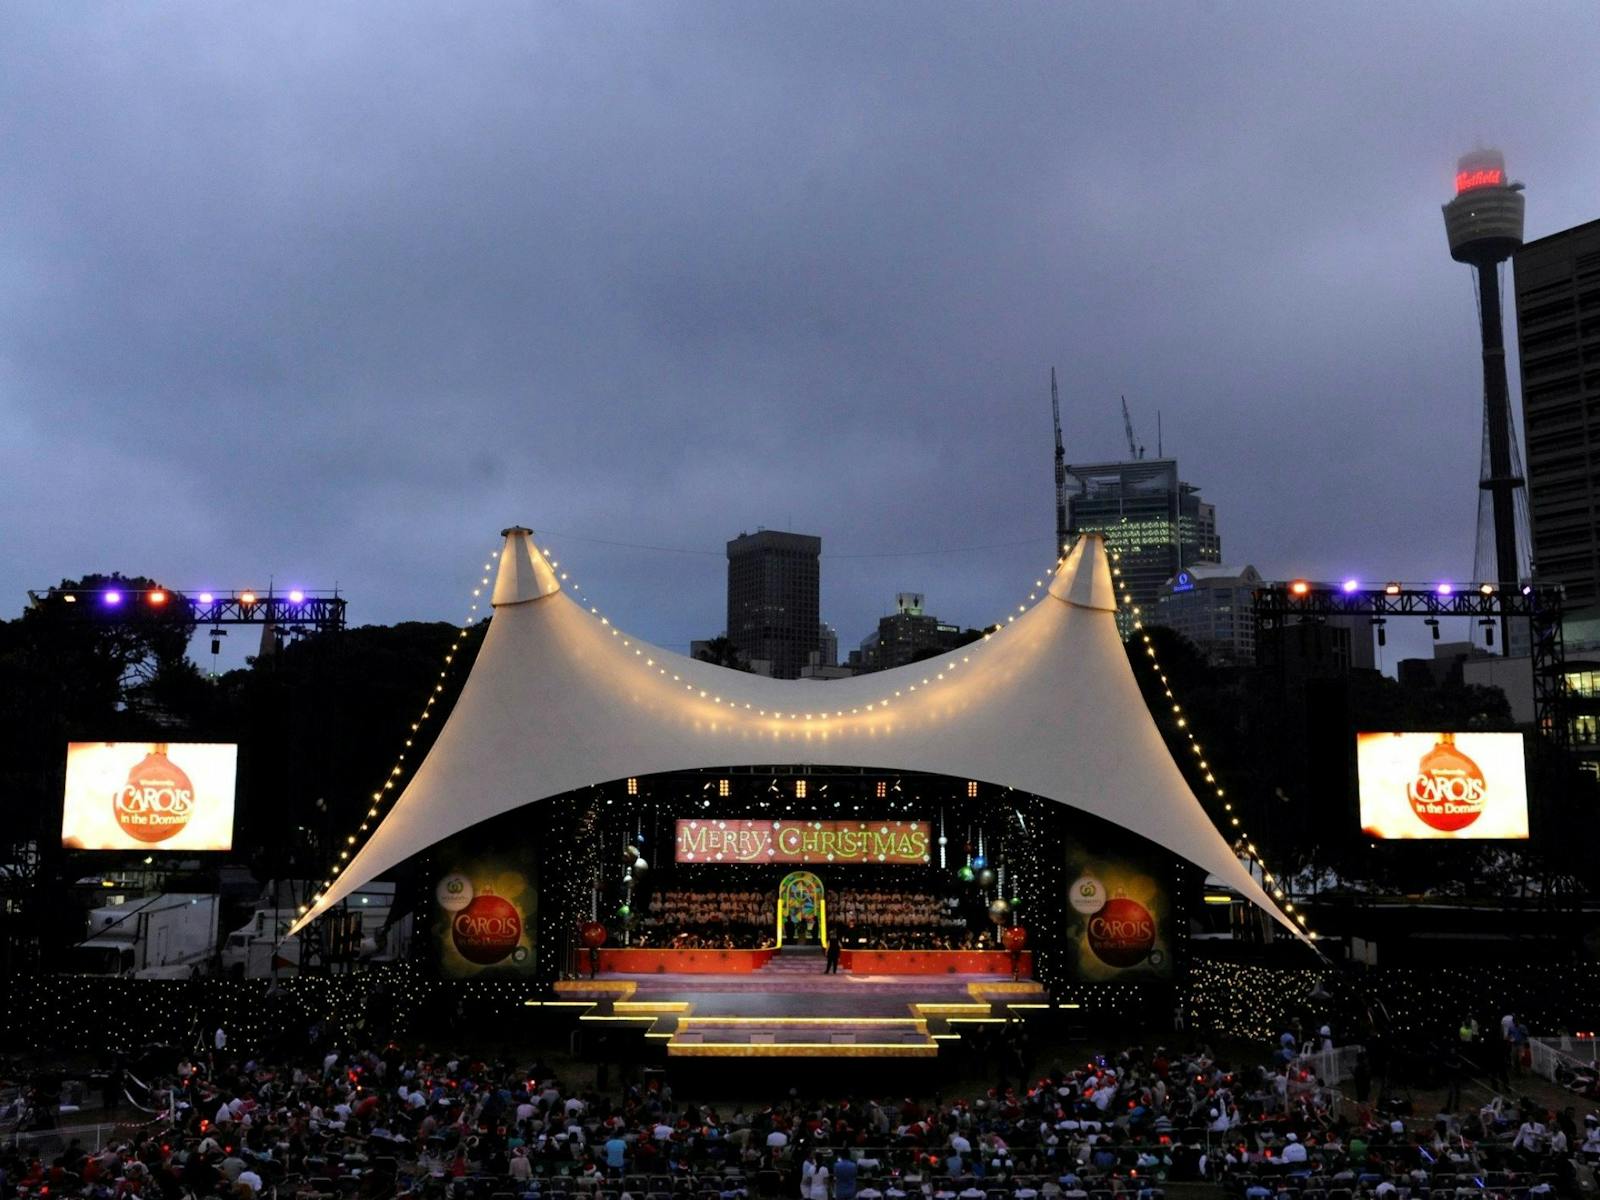 Image for Woolworths Carols in the Domain